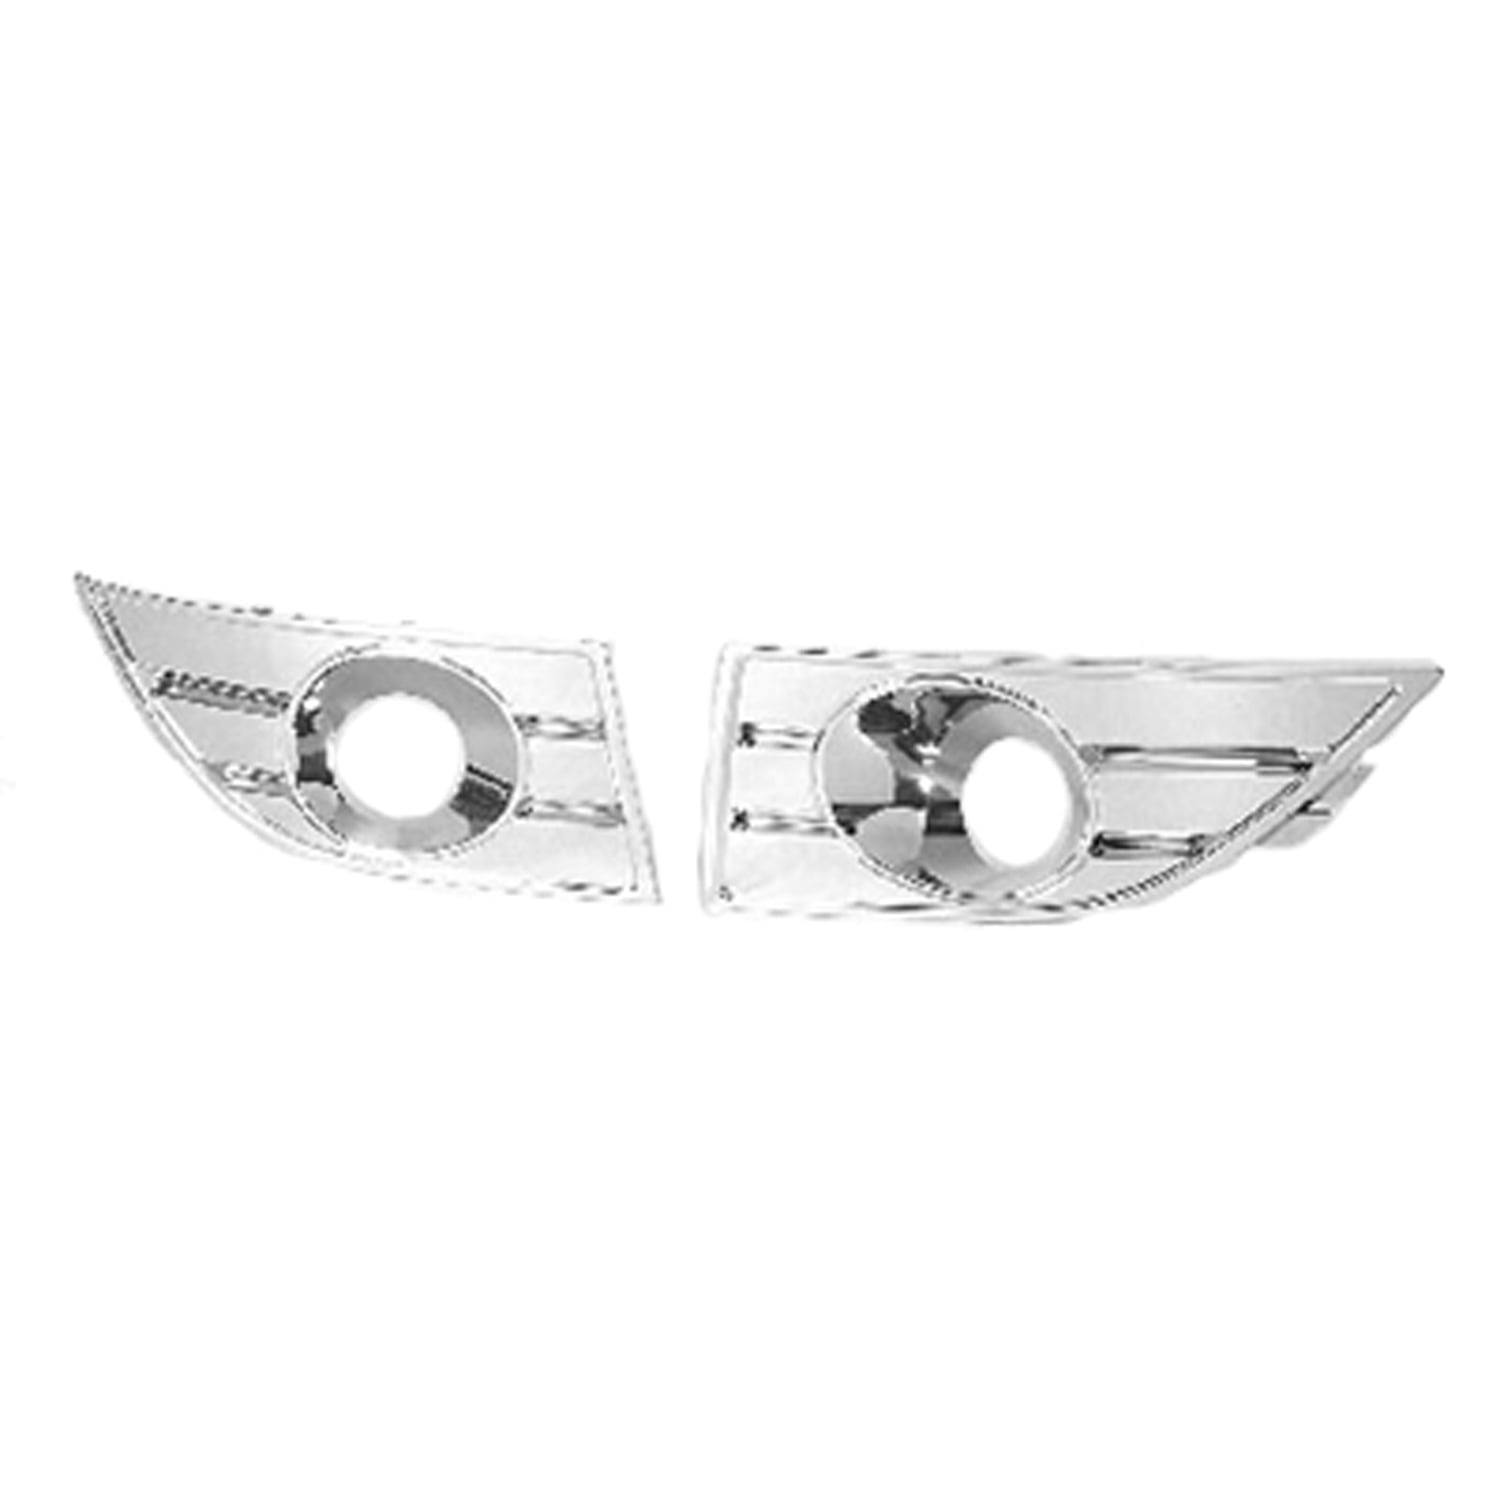 New Fog Light Trim for Ford Taurus FO1038109 2008 to 2009 Driver Side